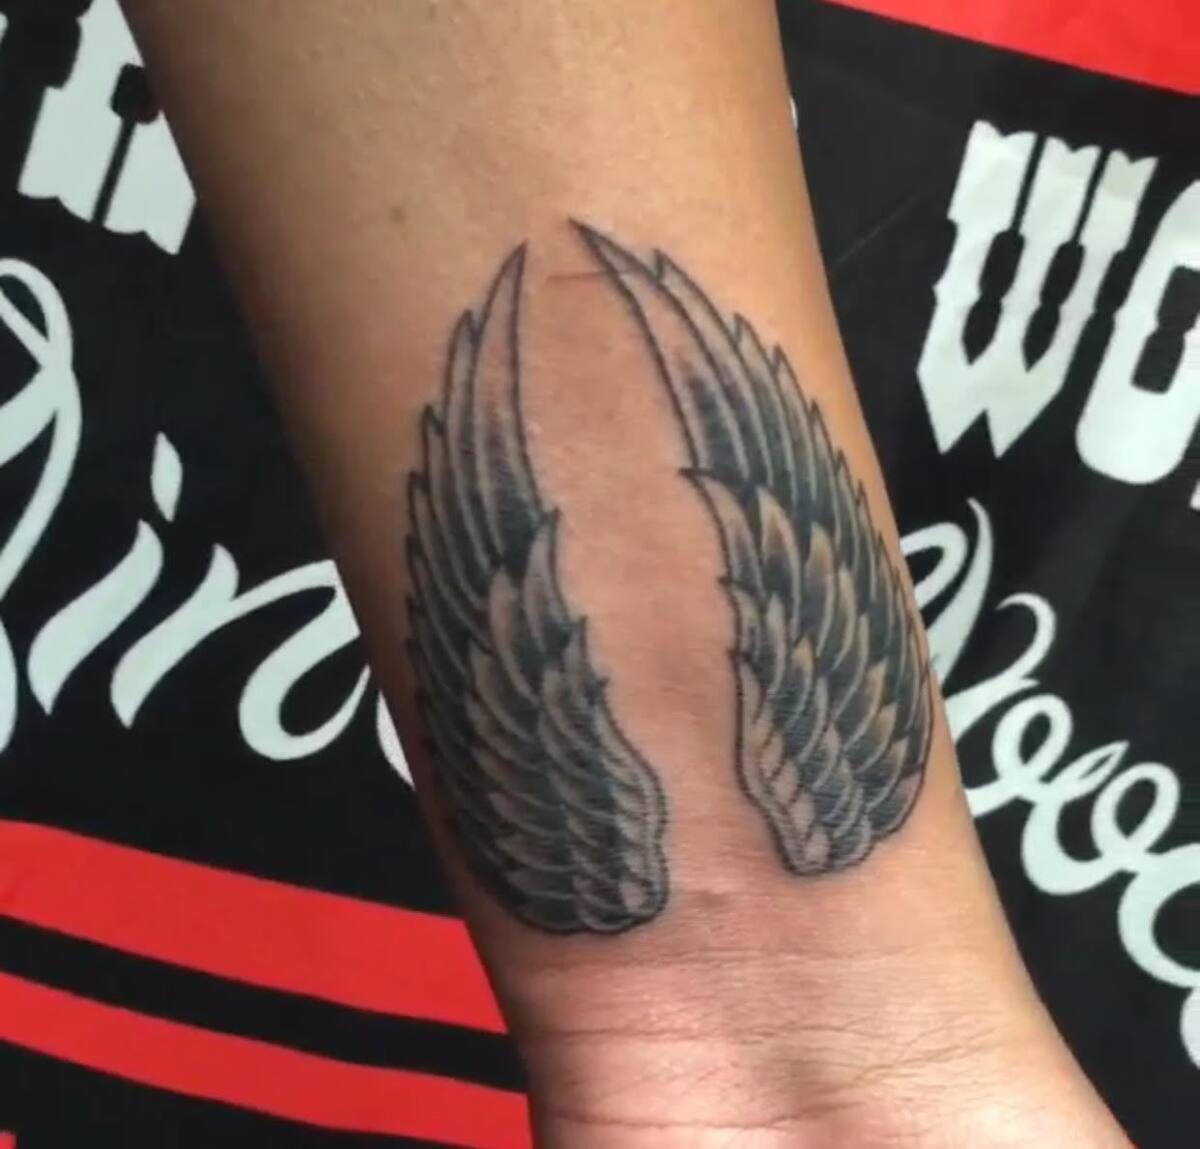 Hermes inspired wing tattoos (mirrored on other leg) done by Deco @ Kaizen  Tattoos and Piercings in Cumbernauld : r/tattoos